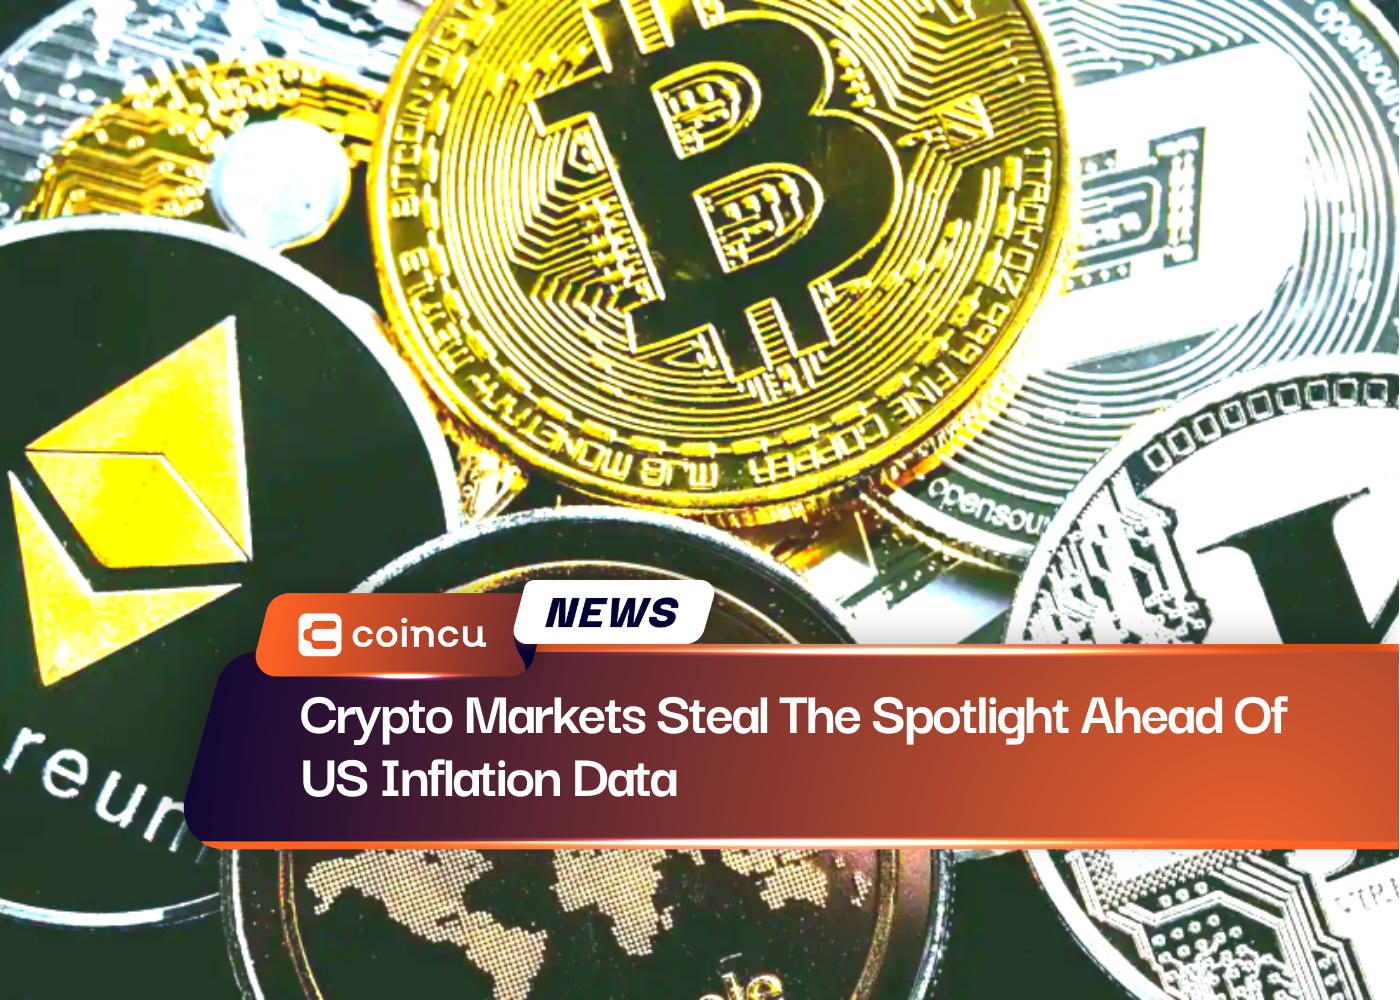 Crypto Markets Steal The Spotlight Ahead Of US Inflation Data